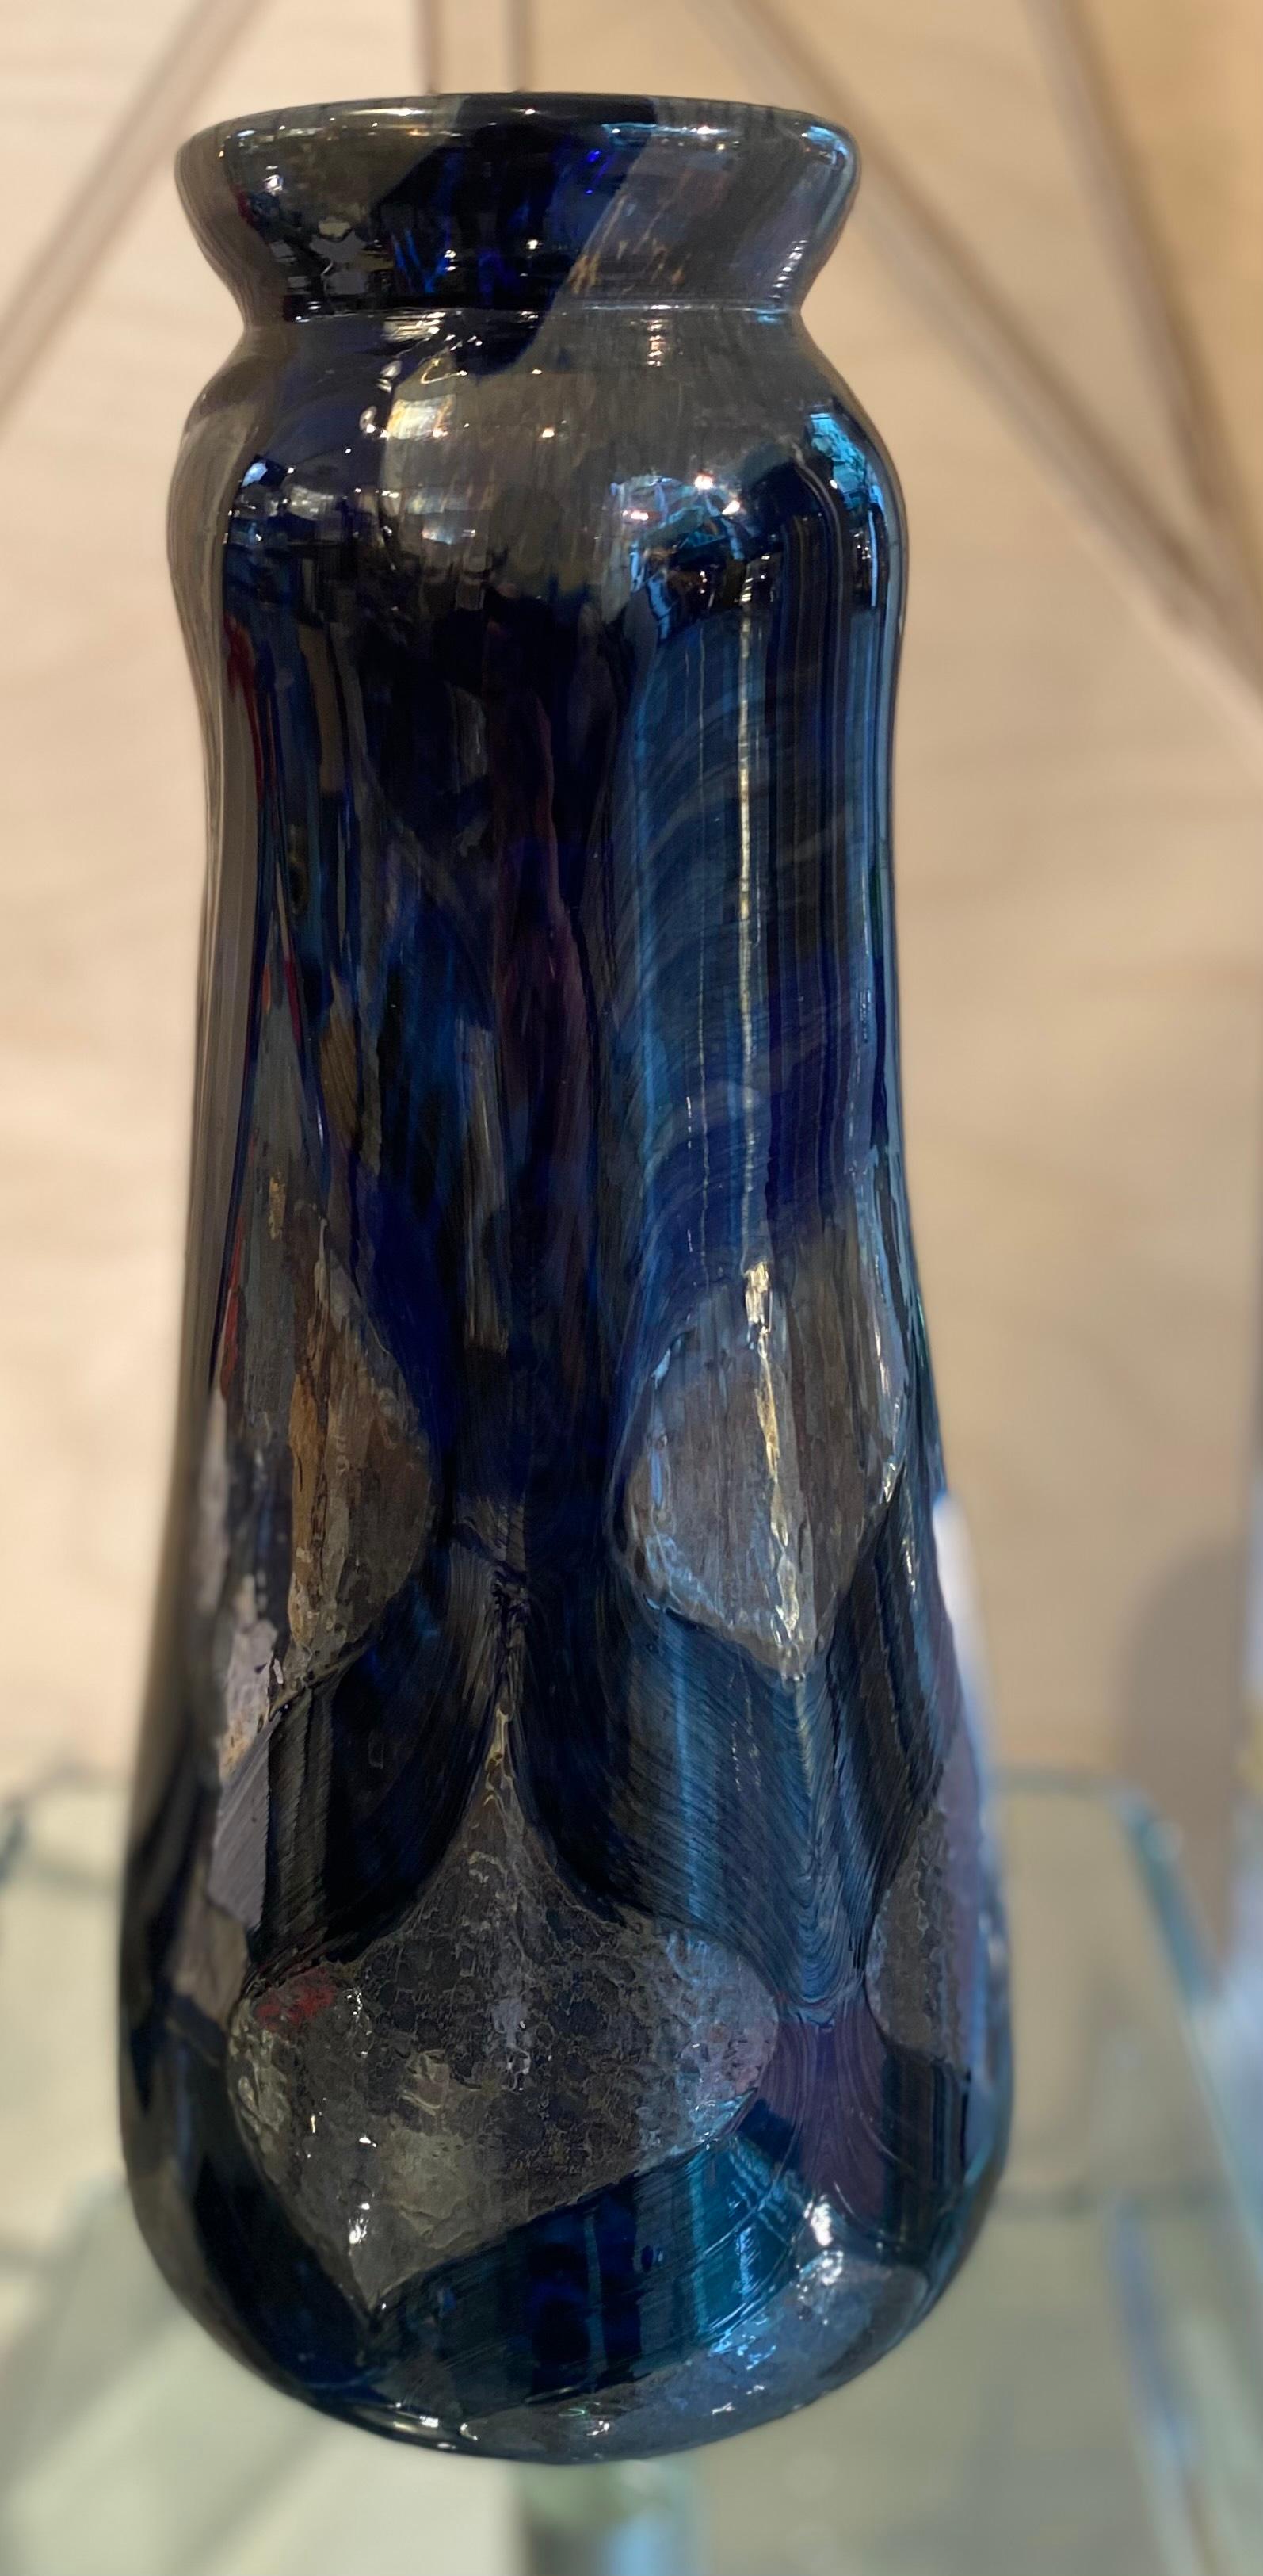 Glass vase from Biot 
Signed Novaro and dated on the bottom of the vase
1977
H 31 x ø 14 cm
Price : 1200€ for the vase.